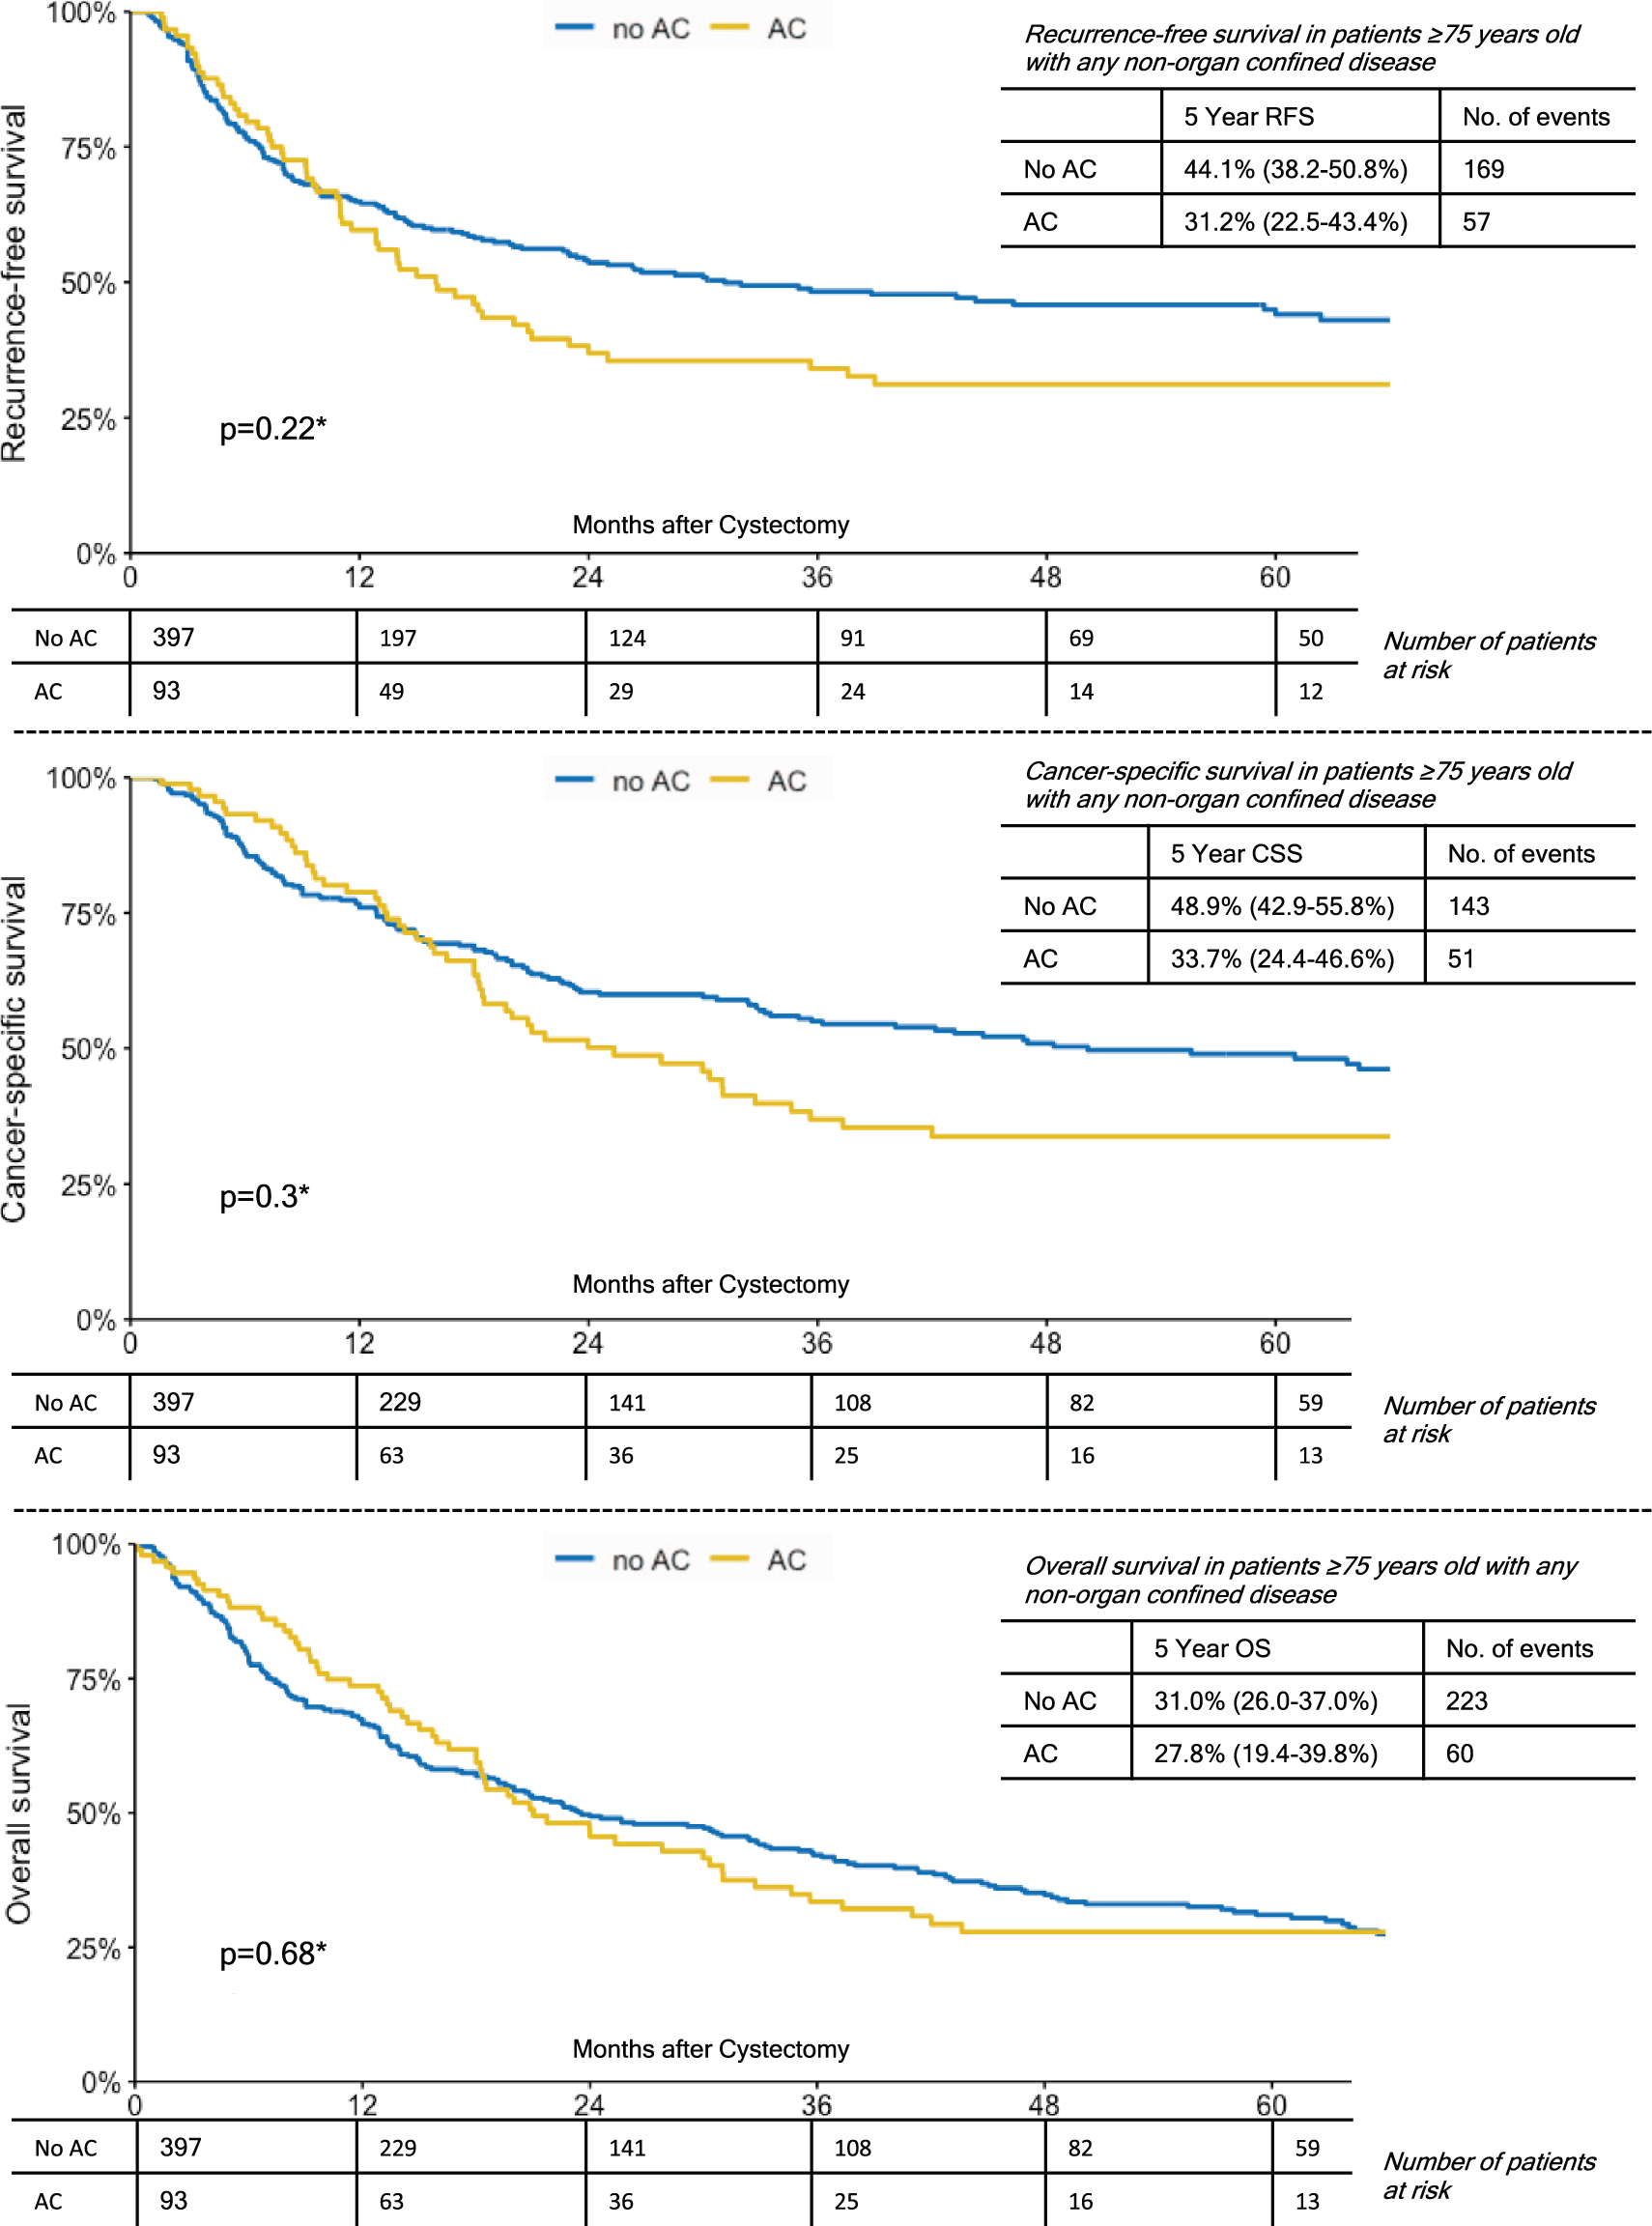 Kaplan-Meier Curves Demonstrating the Effect of Adjuvant Chemotherapy on Recurrence-Free Survival; Cancer-Specific Survival and Overall Survival in Patients Over 75 Years with any Non-Organ Confined Disease.